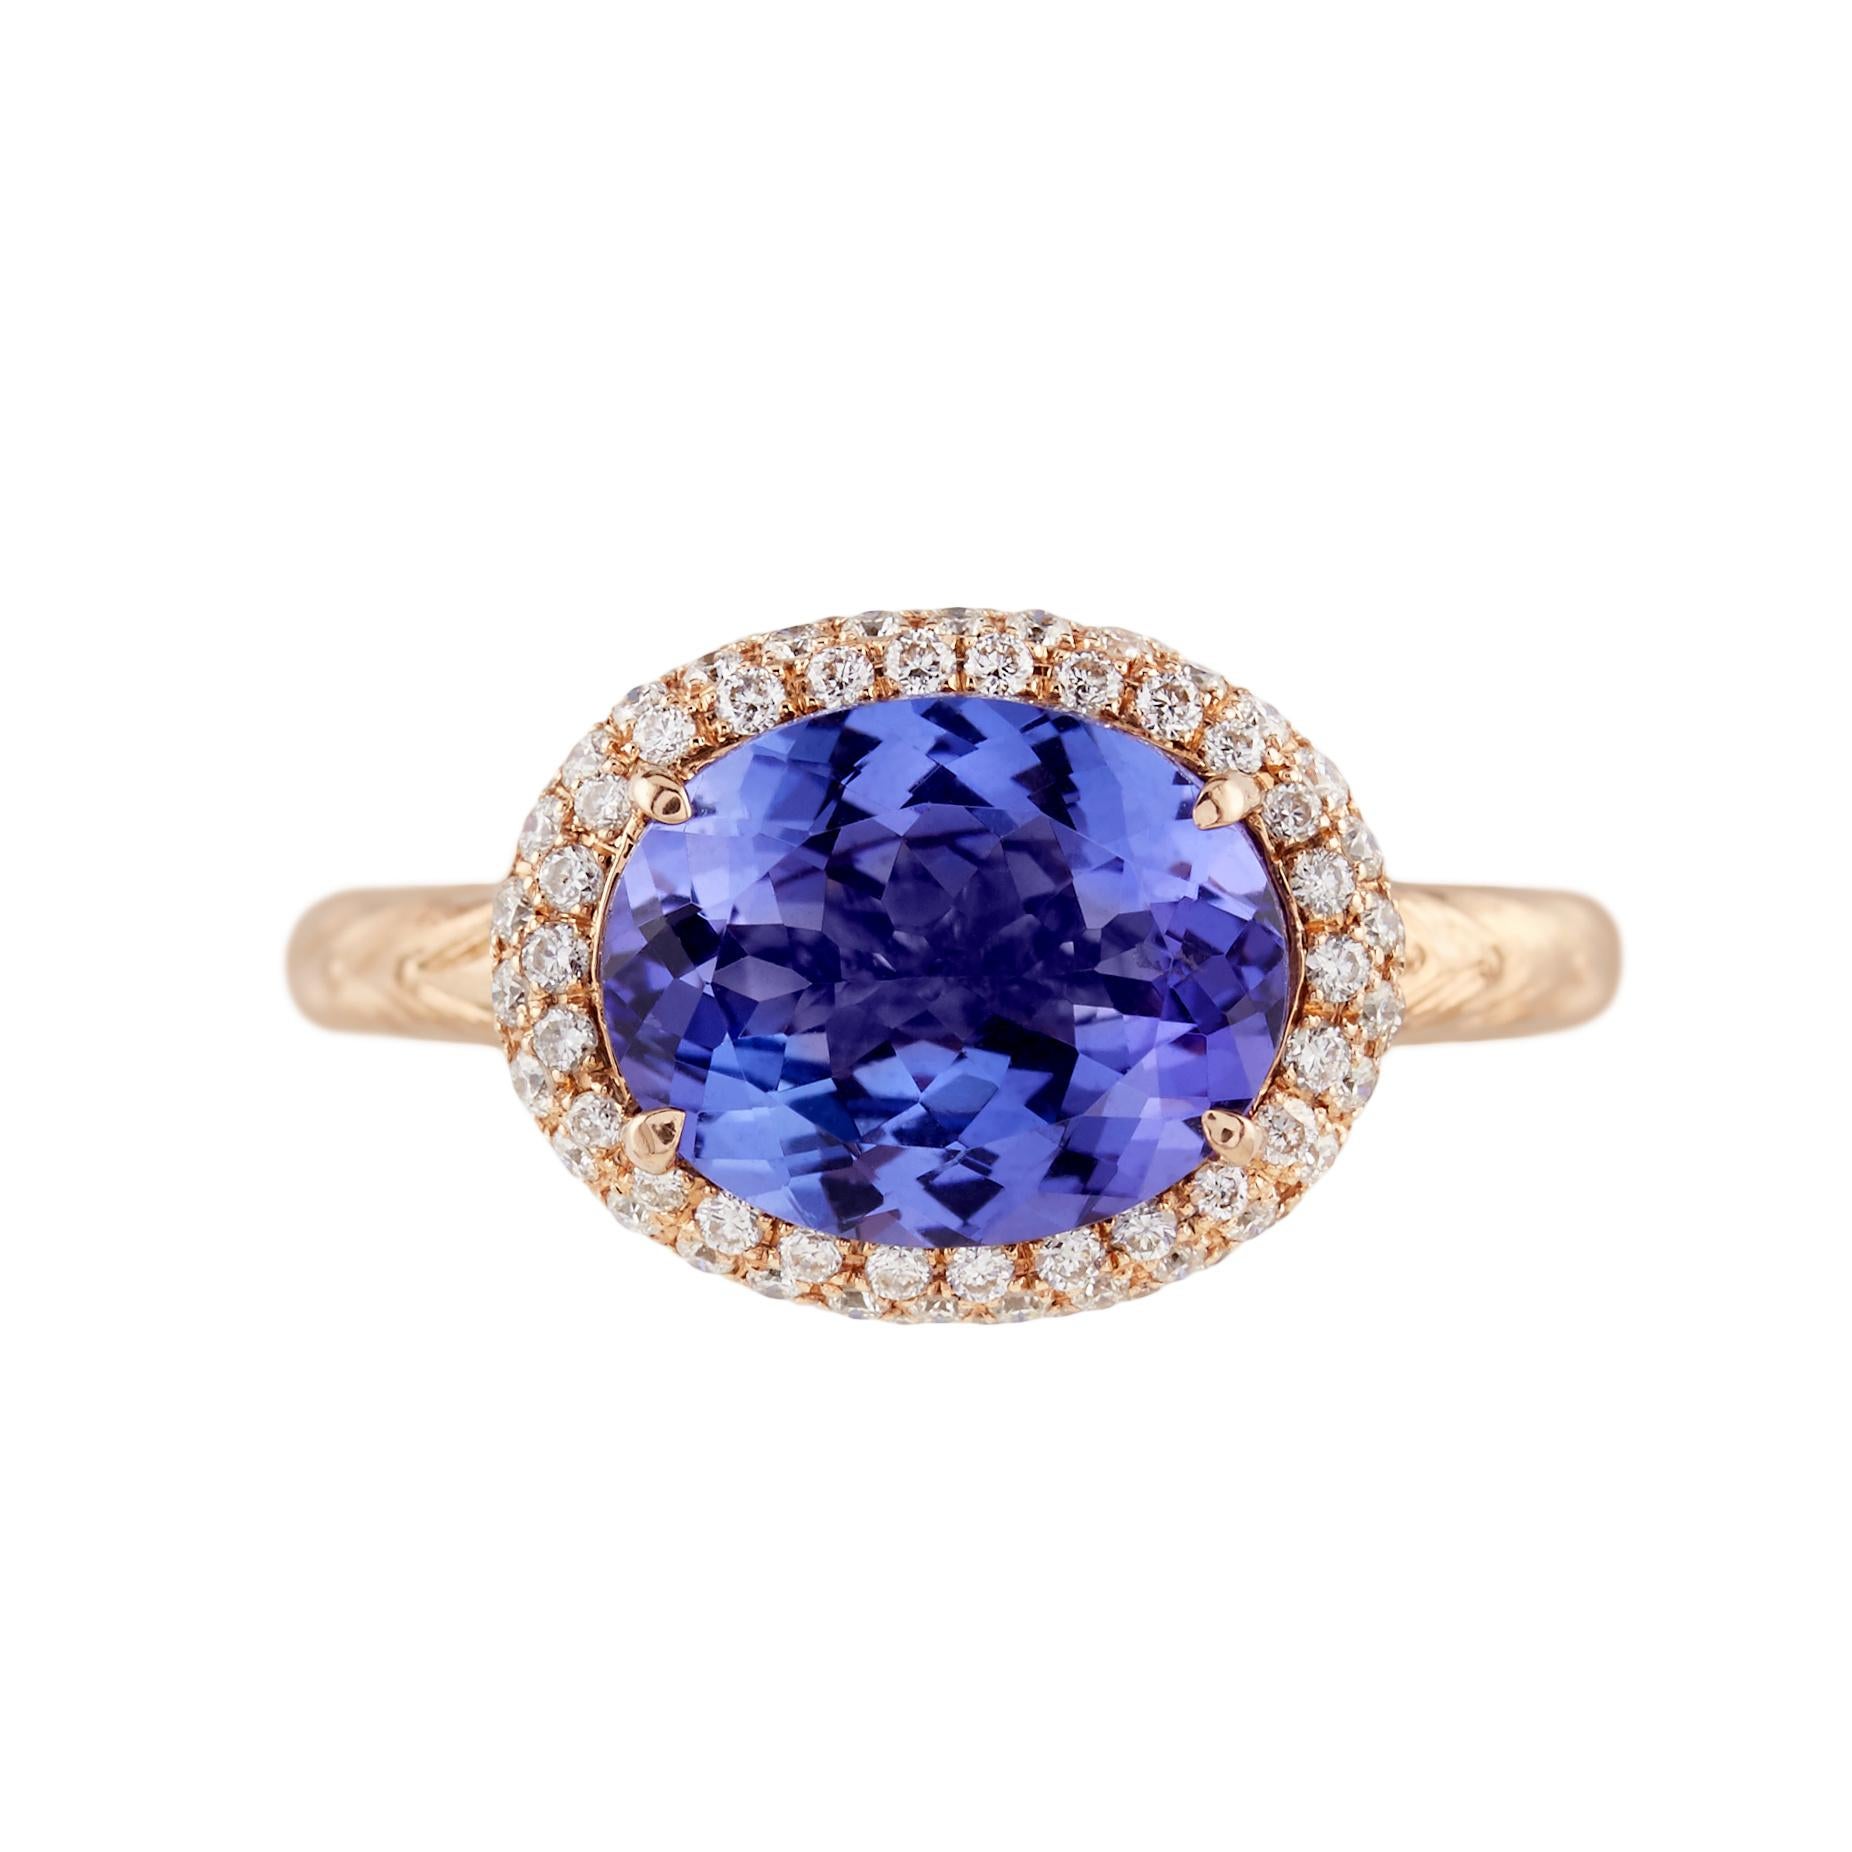 2.08ct Oval Tanzanite beautifully set sideways with a 0.50ct diamond halo ring with a hand engraved shank, 14K rose gold. 